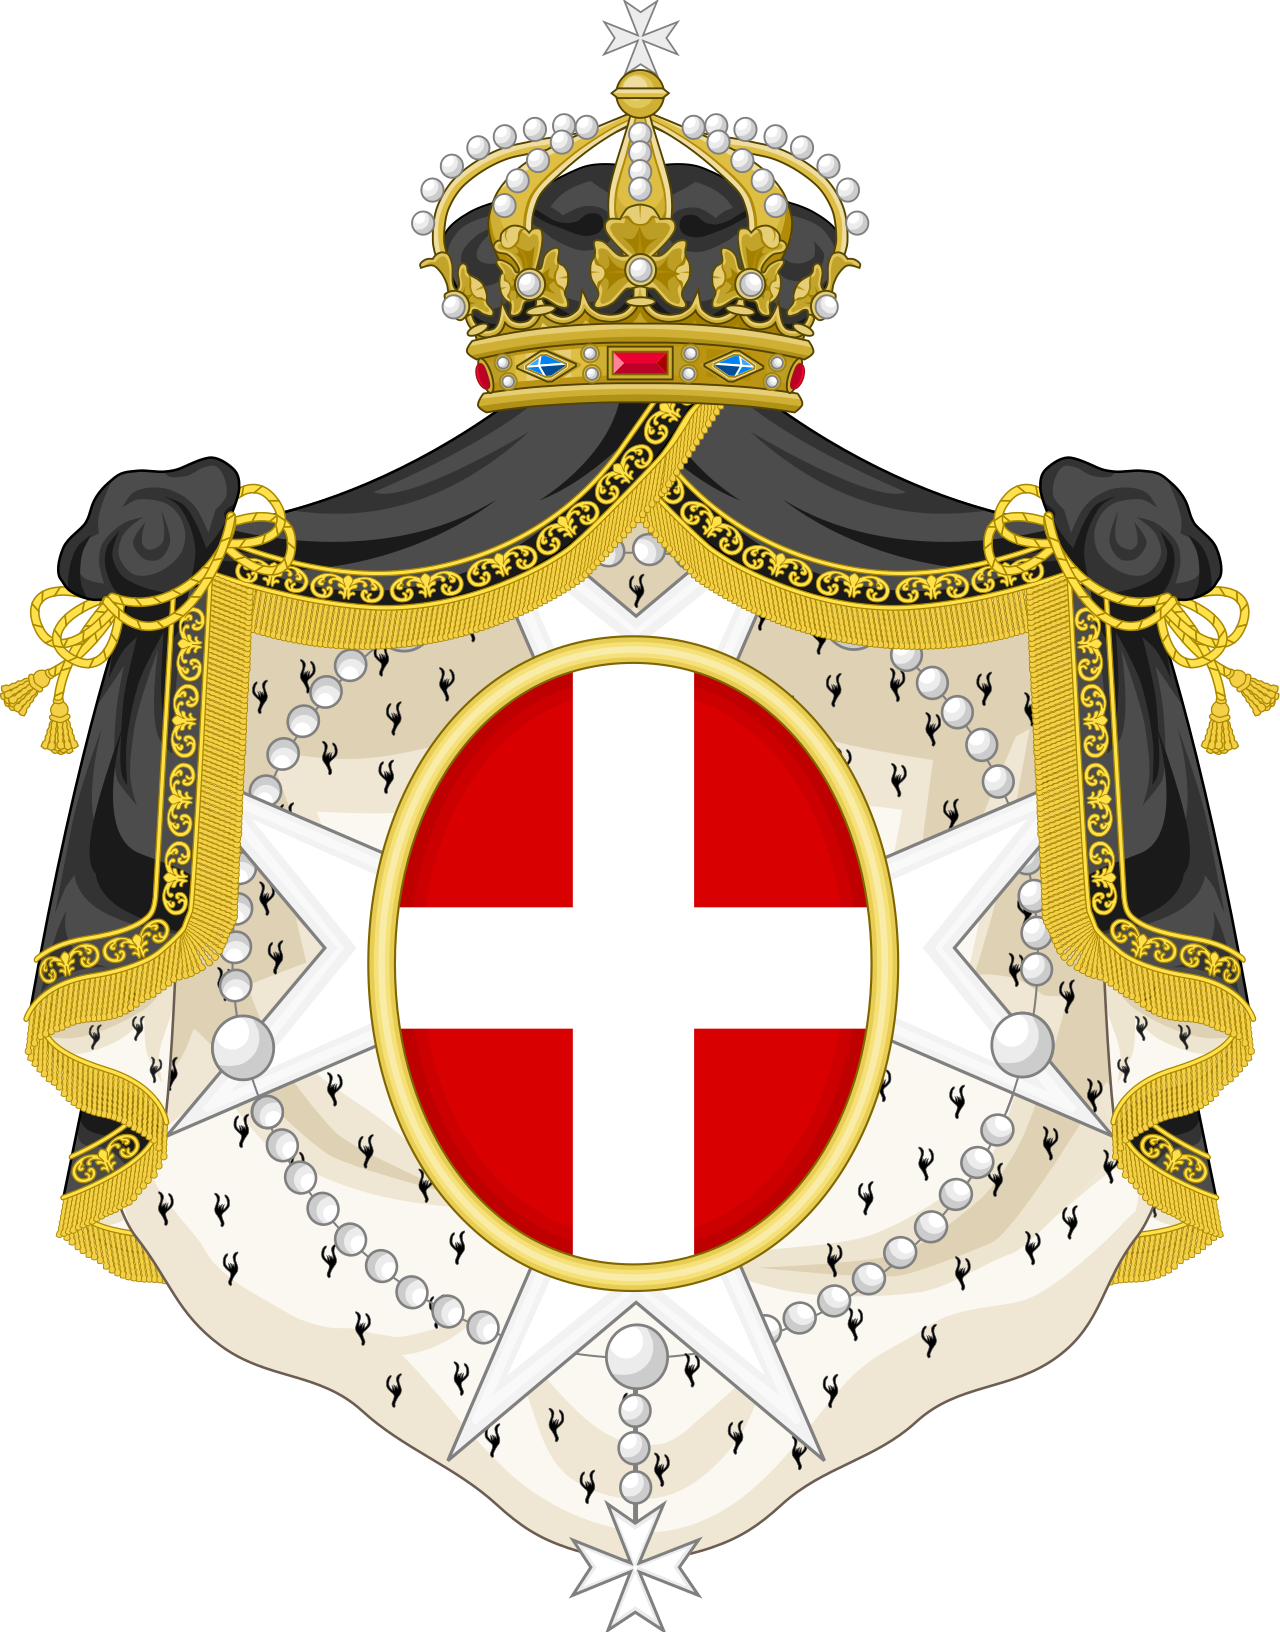 1280px-Coat_of_arms_of_the_Sovereign_Military_Order_of_Malta_%28variant%29.svg.png